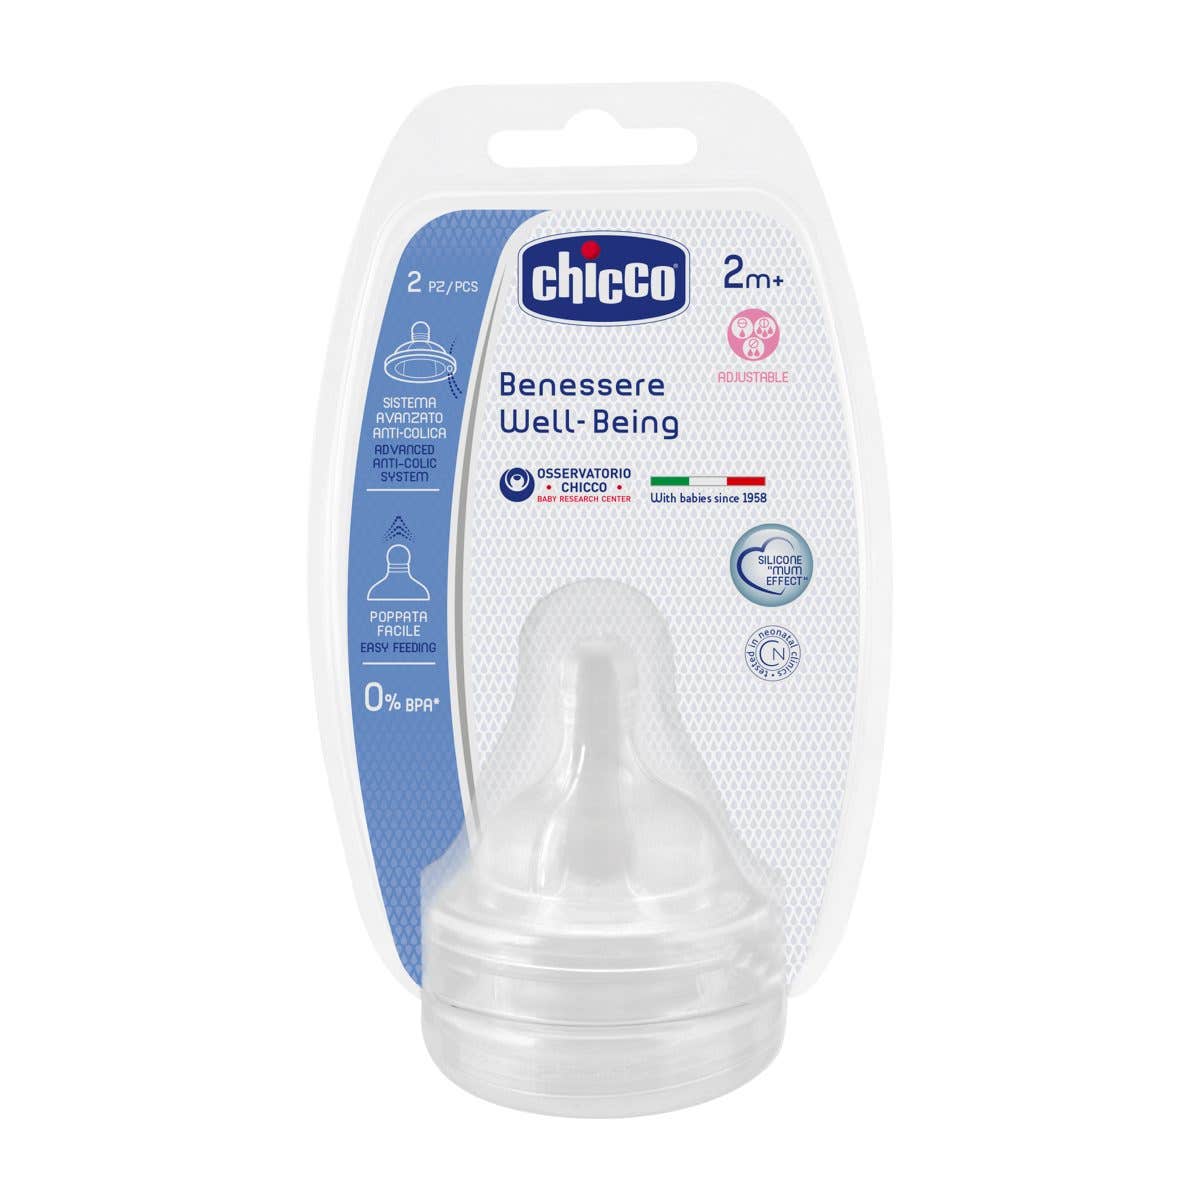 Chicco Wellbeing Adjustbl Teat 2S 2M+